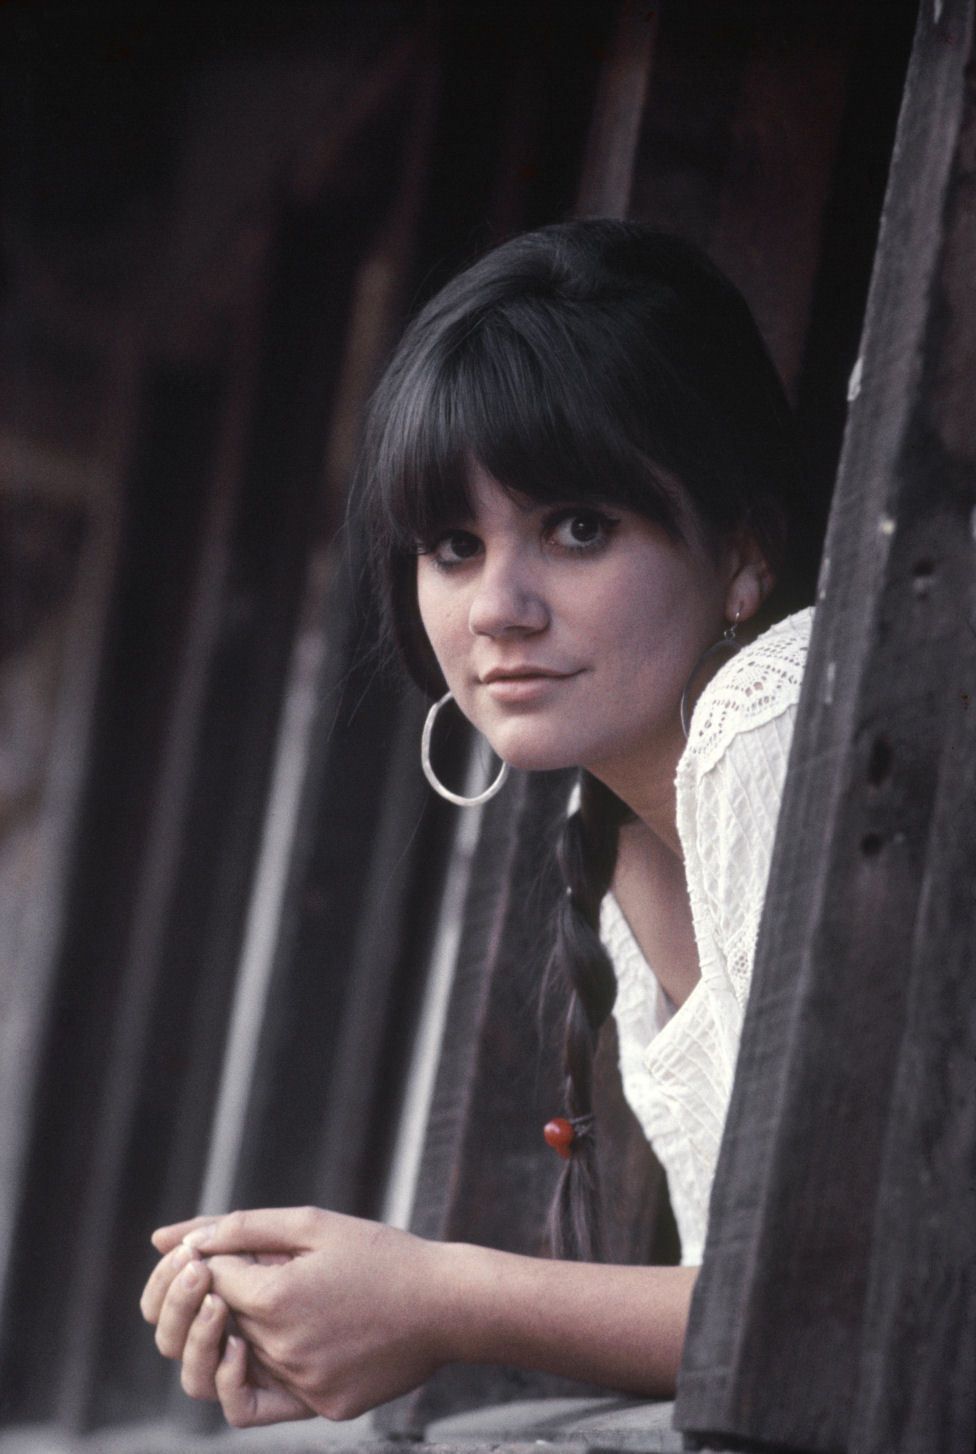 Linda Ronstadt: A Beautiful Voice Silenced. She Announced She Will Never Sing Again Due To Parkinsons Disease. (2013)